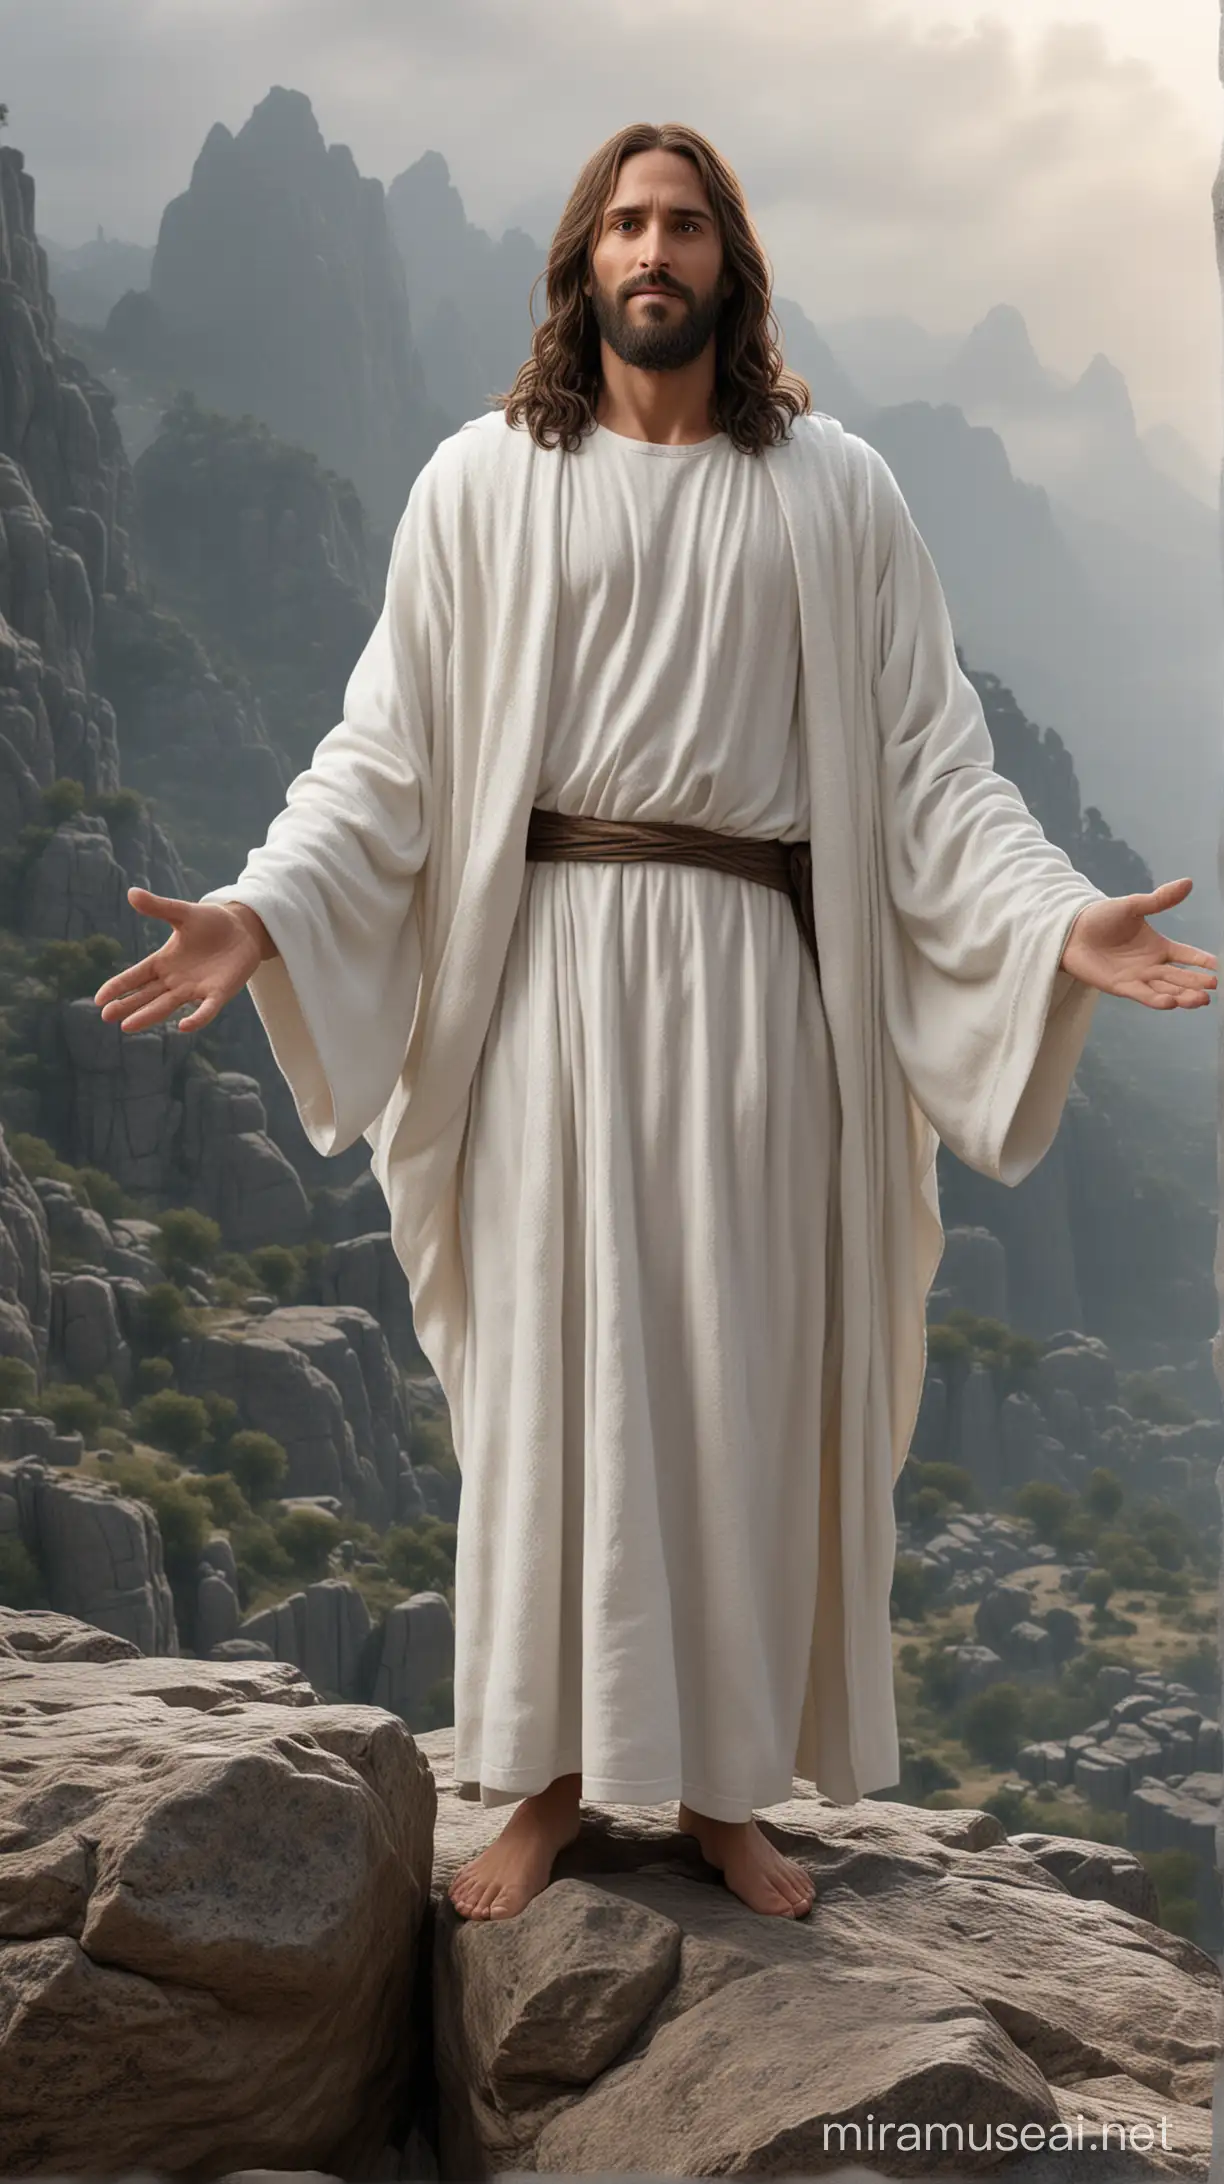  ULTRA REALISM PHOTOREALISTIC Generate a hyper-realistic image of  Jesus standing on a high rock in a white robe, warm welcoming smile